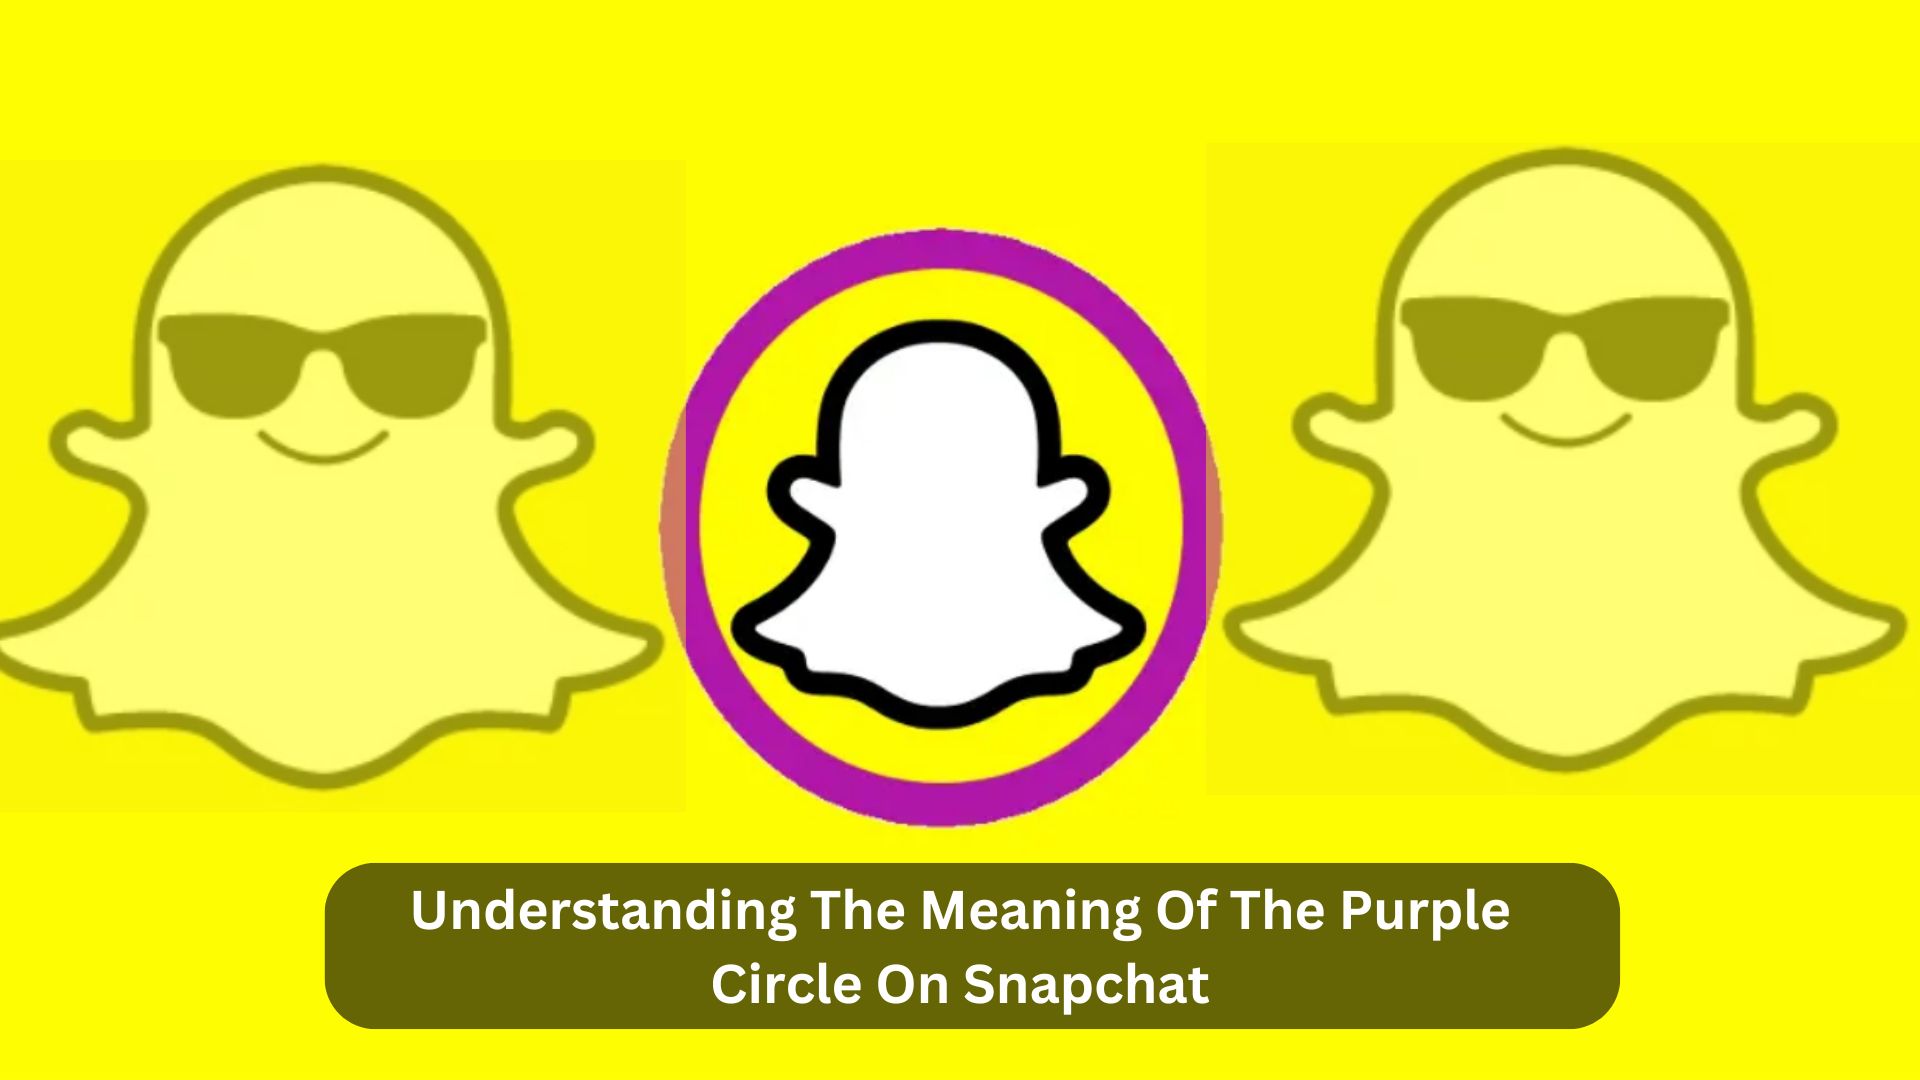 Understanding The Meaning Of The Purple Circle On Snapchat